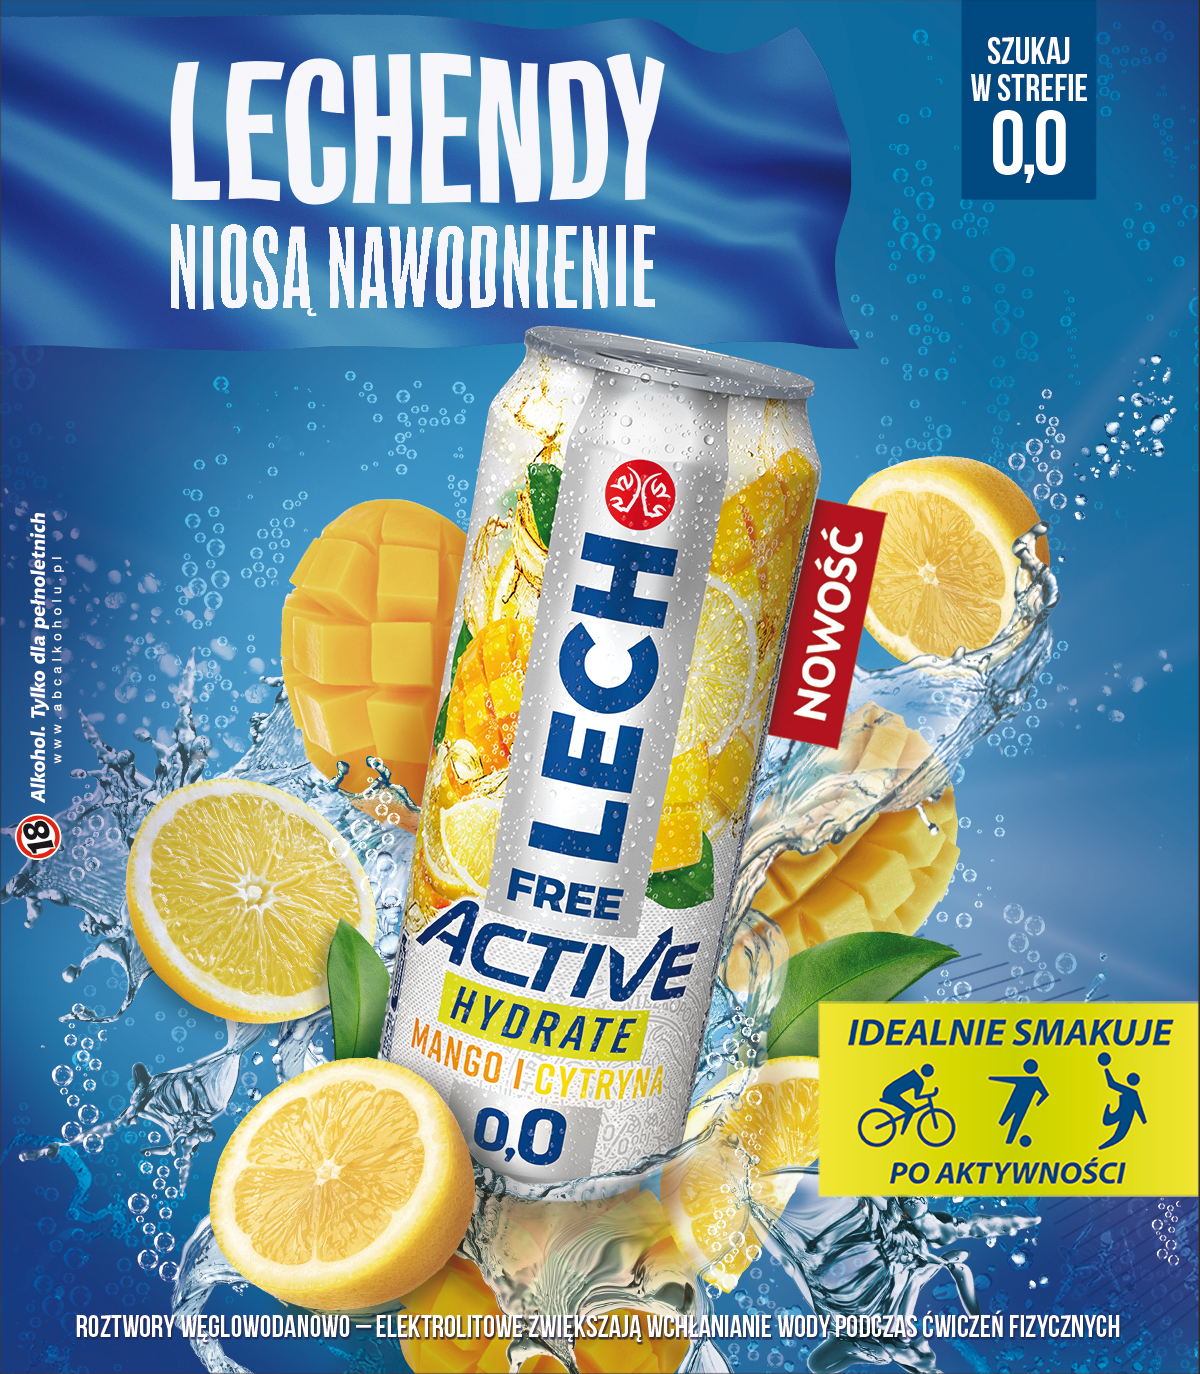 Novelty in Lech Free’s portfolio – Lech Free Active. The first non-alcoholic beer with hydrating properties